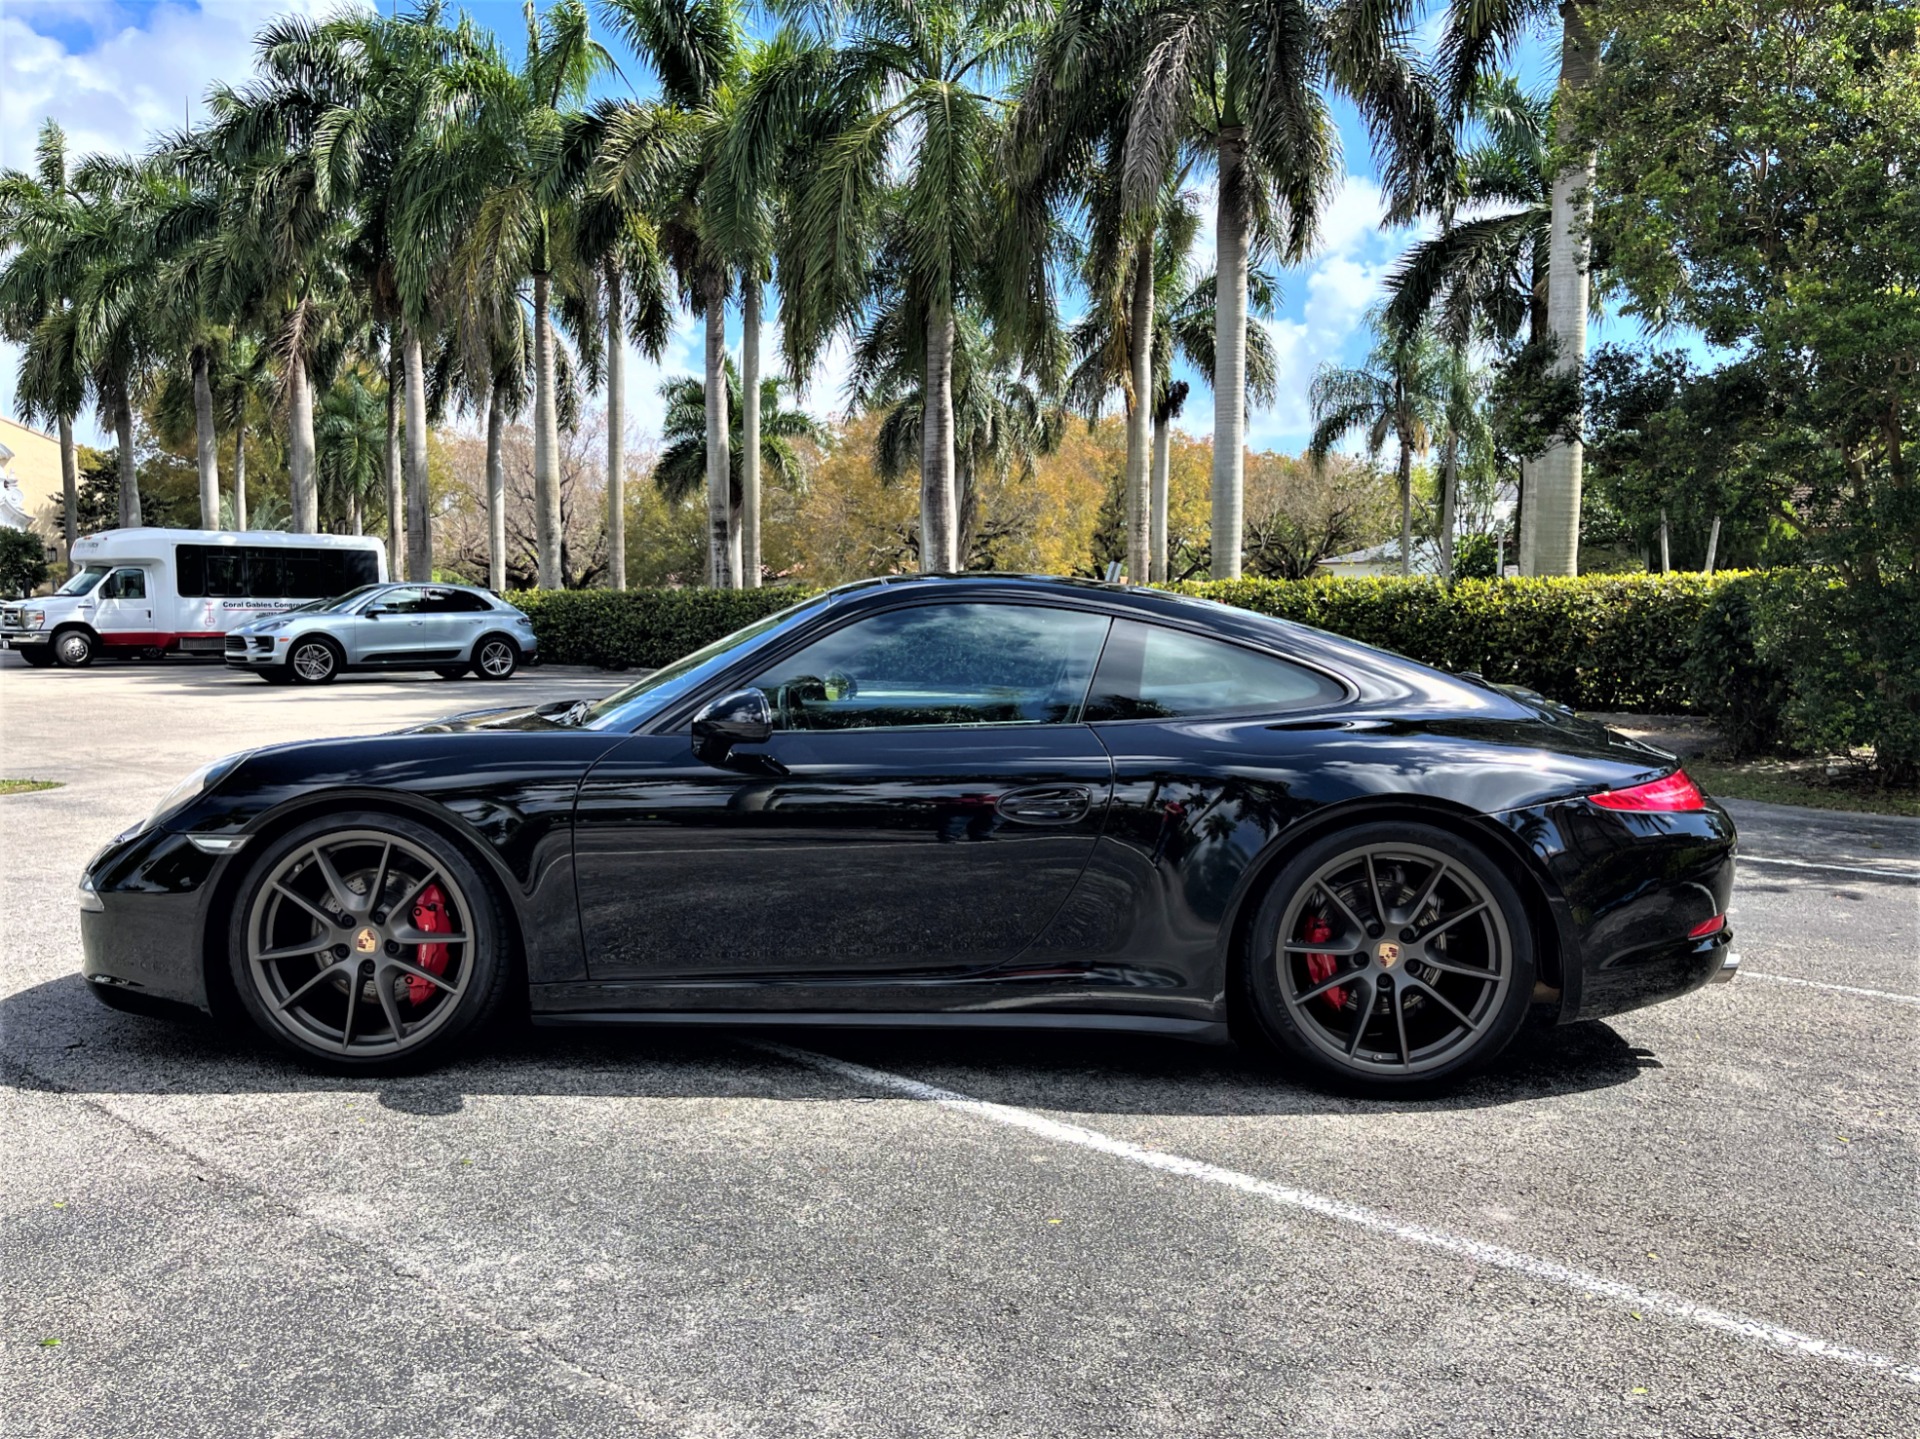 Used 2015 Porsche 911 Carrera 4S for sale Sold at The Gables Sports Cars in Miami FL 33146 1